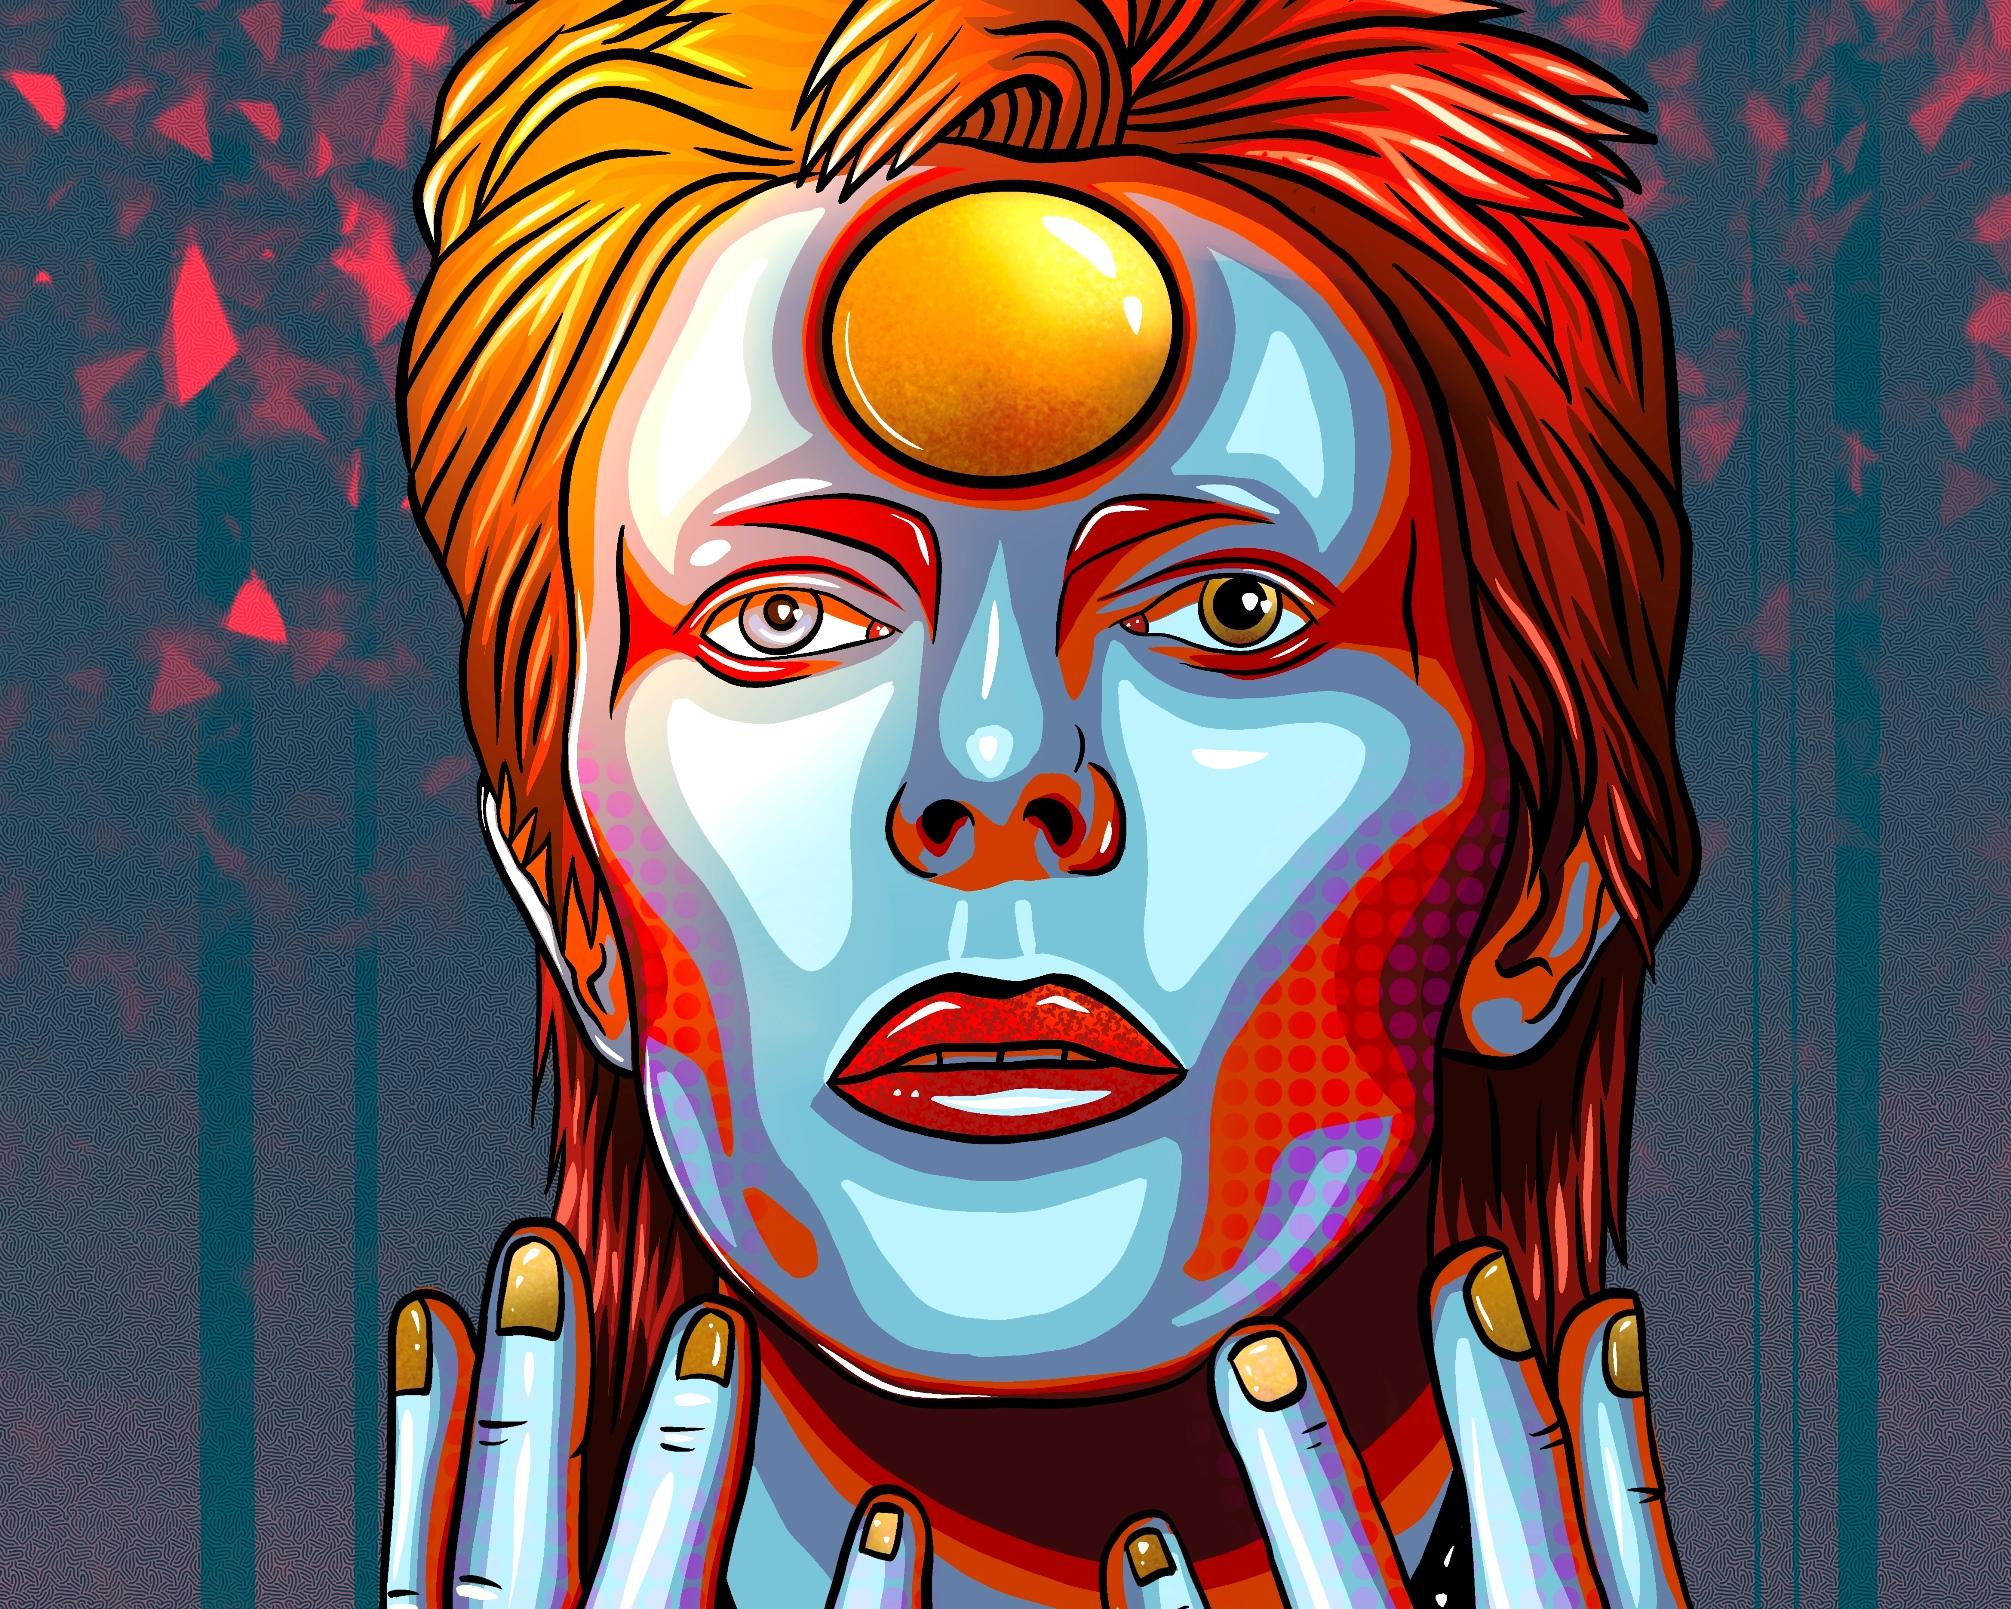 A digital painting in the form of pop art by Lily Bourne of David Bowie from his Ziggy Starduct period. Orange and blue coloured.